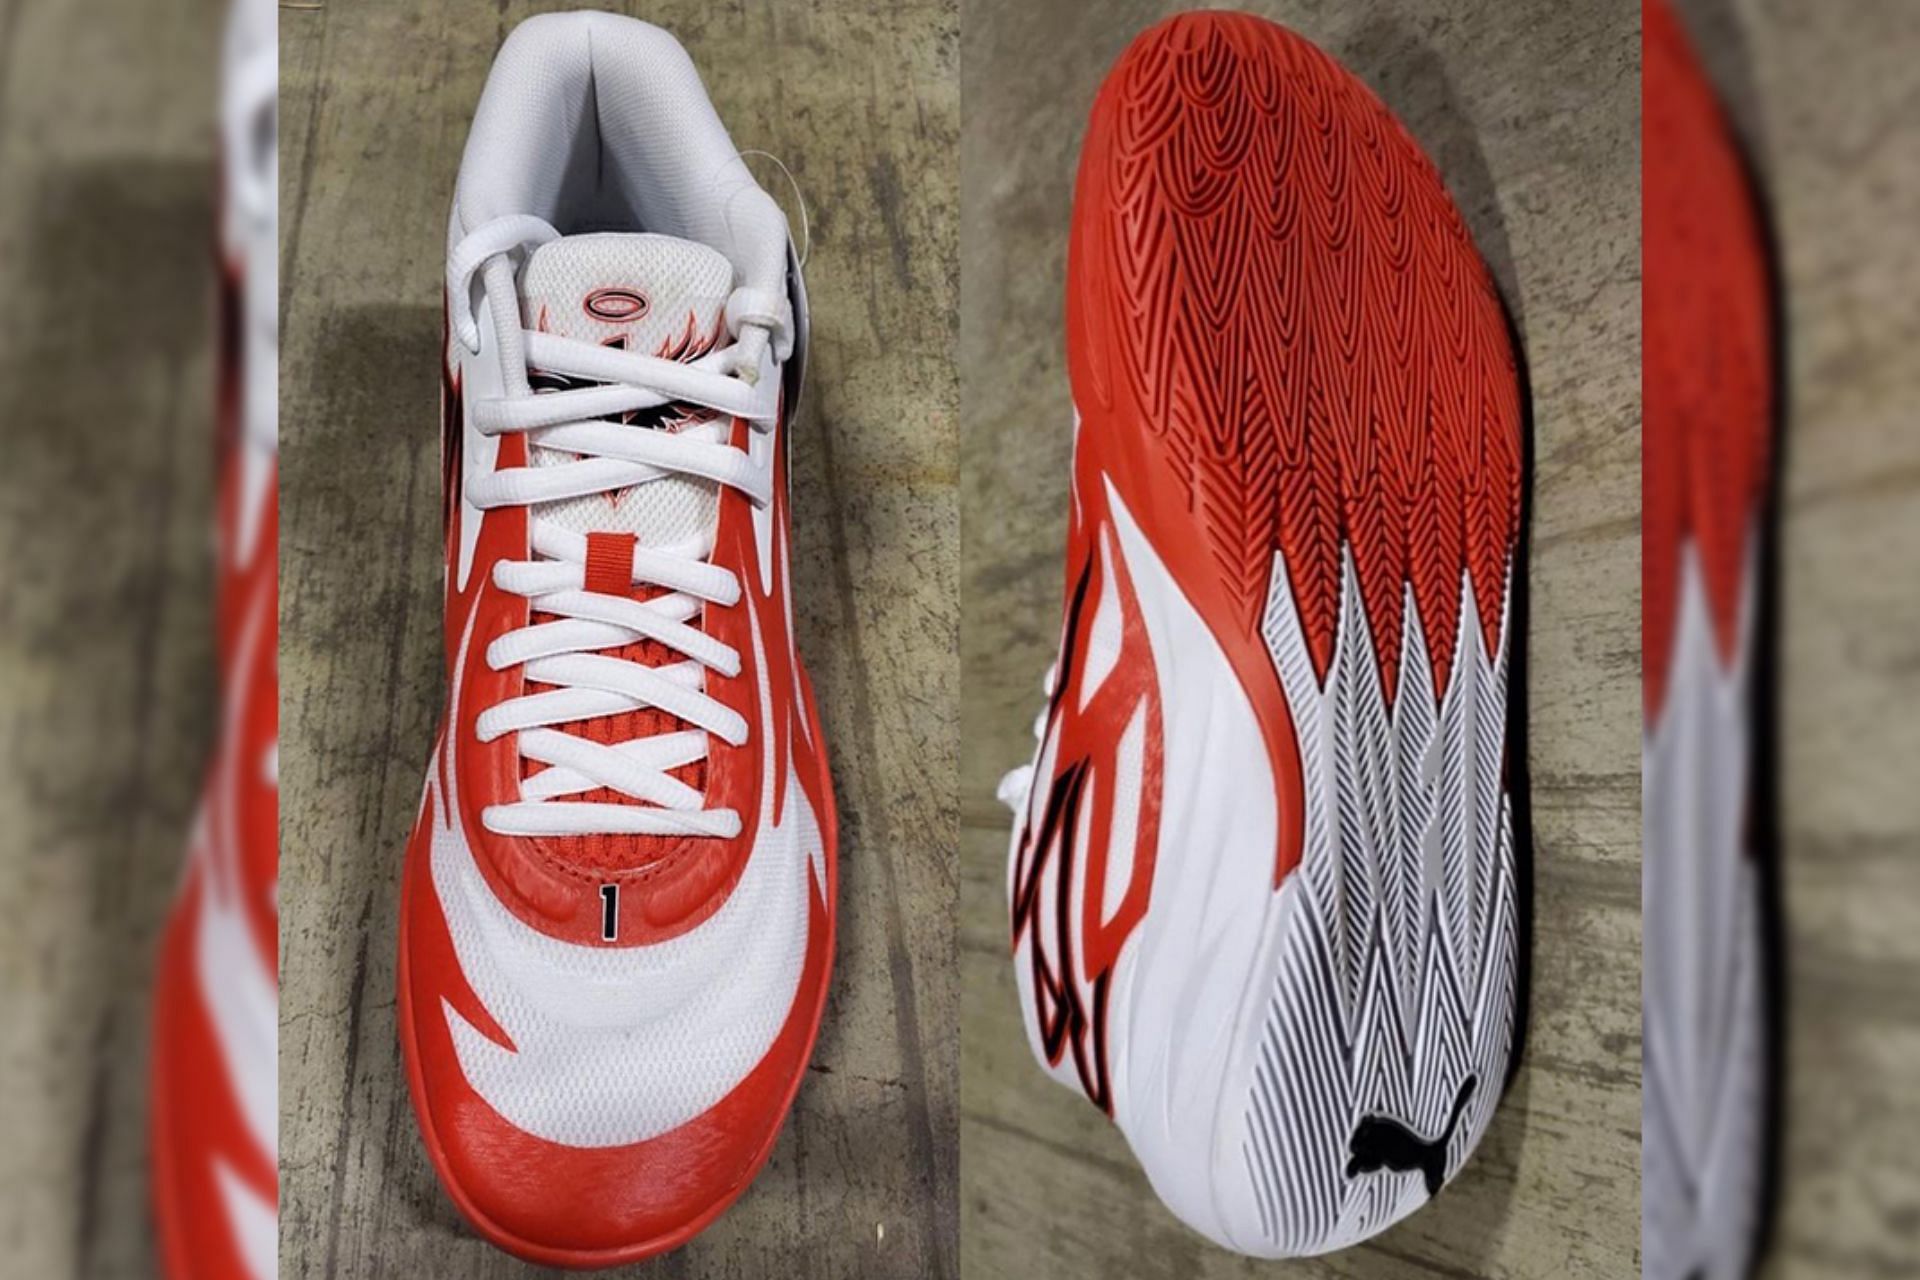 Take a closer look at the upcoming white/red colorway (Image via Sportskeeda)